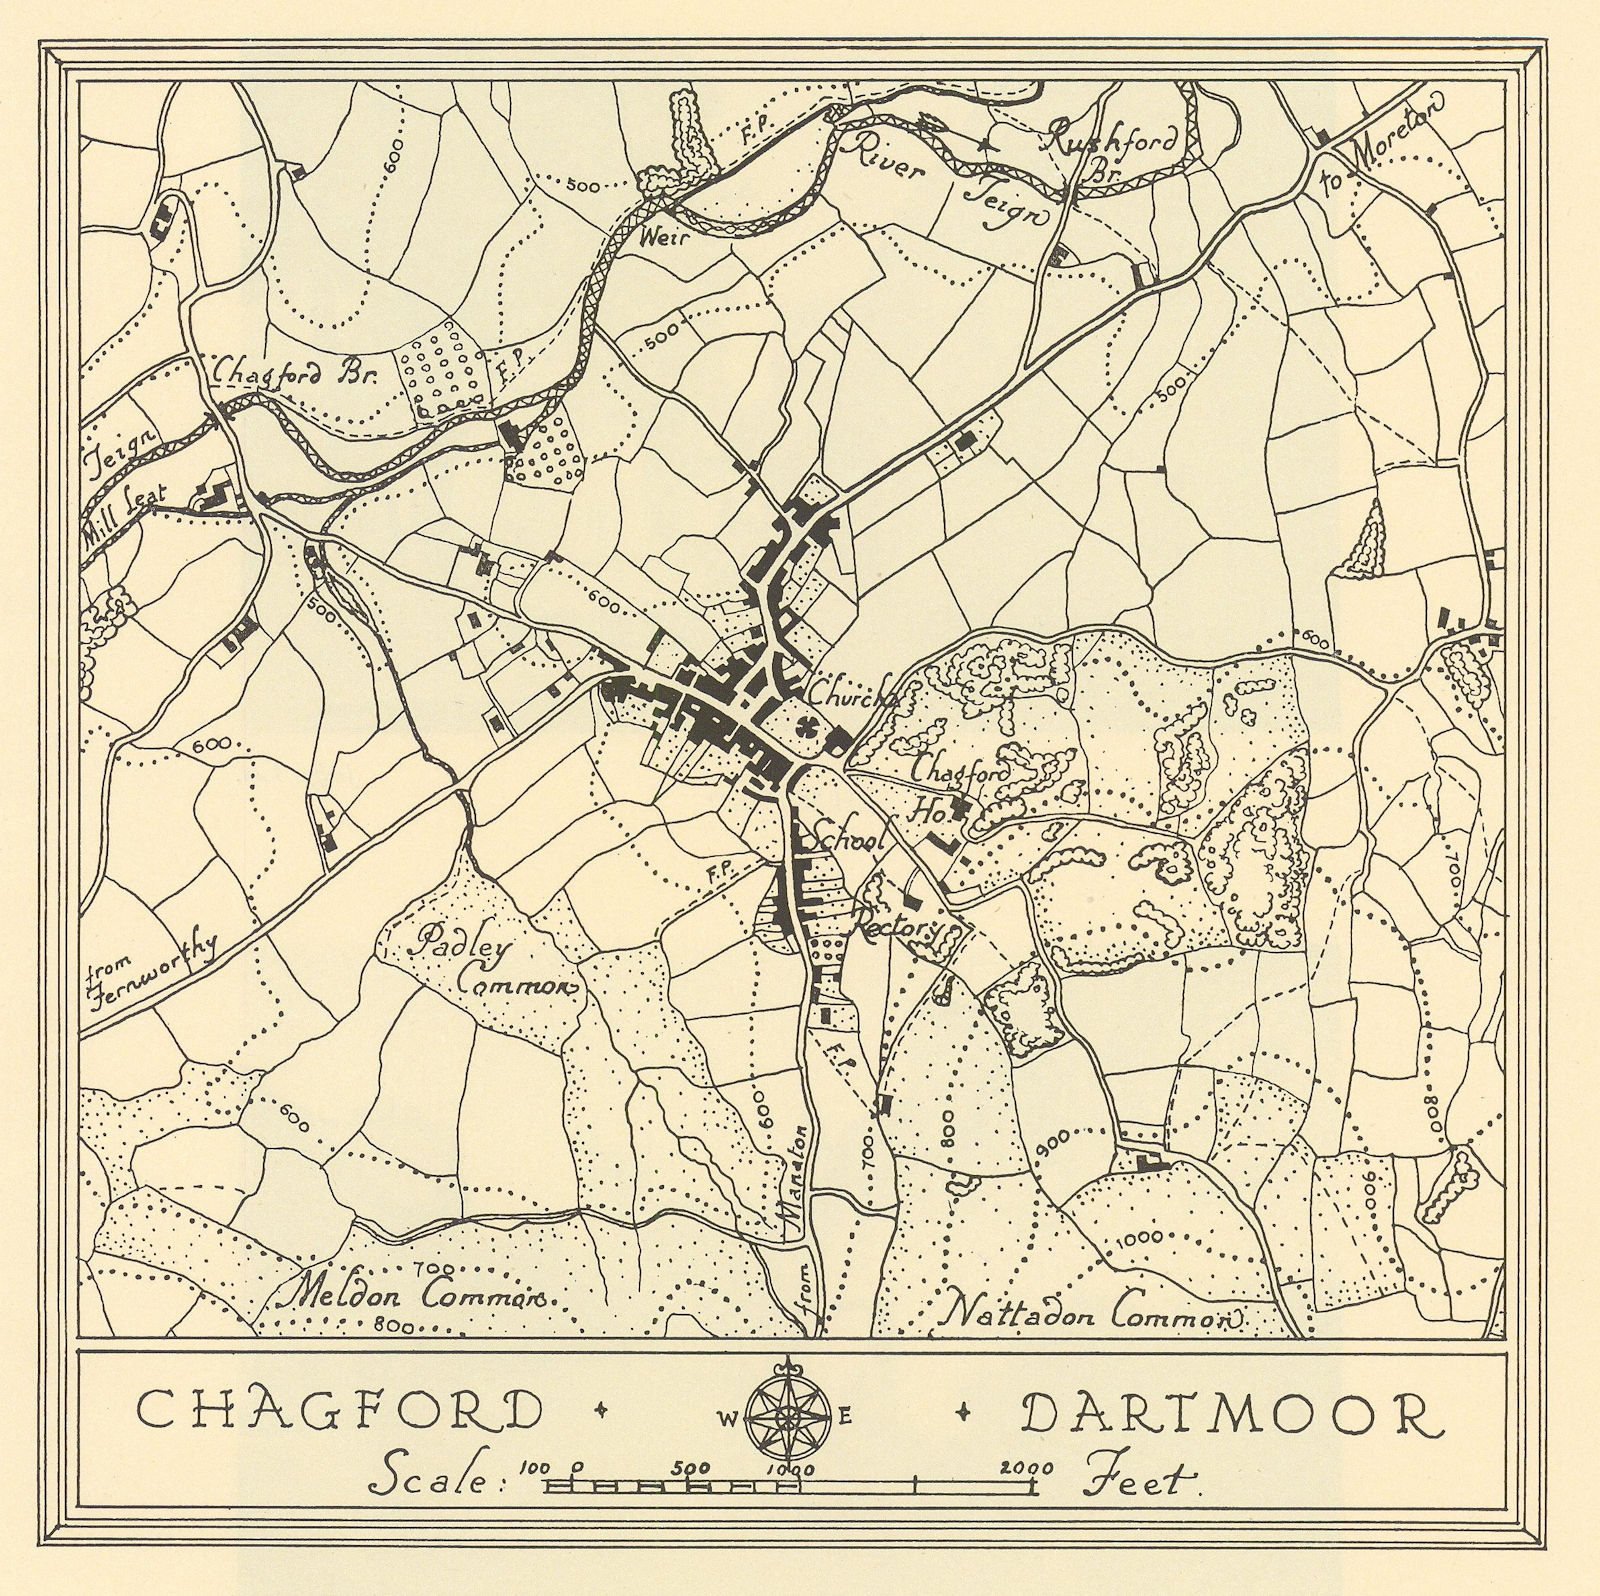 Associate Product Town plan of CHAGFORD Dartmoor Devon by William Harding Thompson 1932 old map